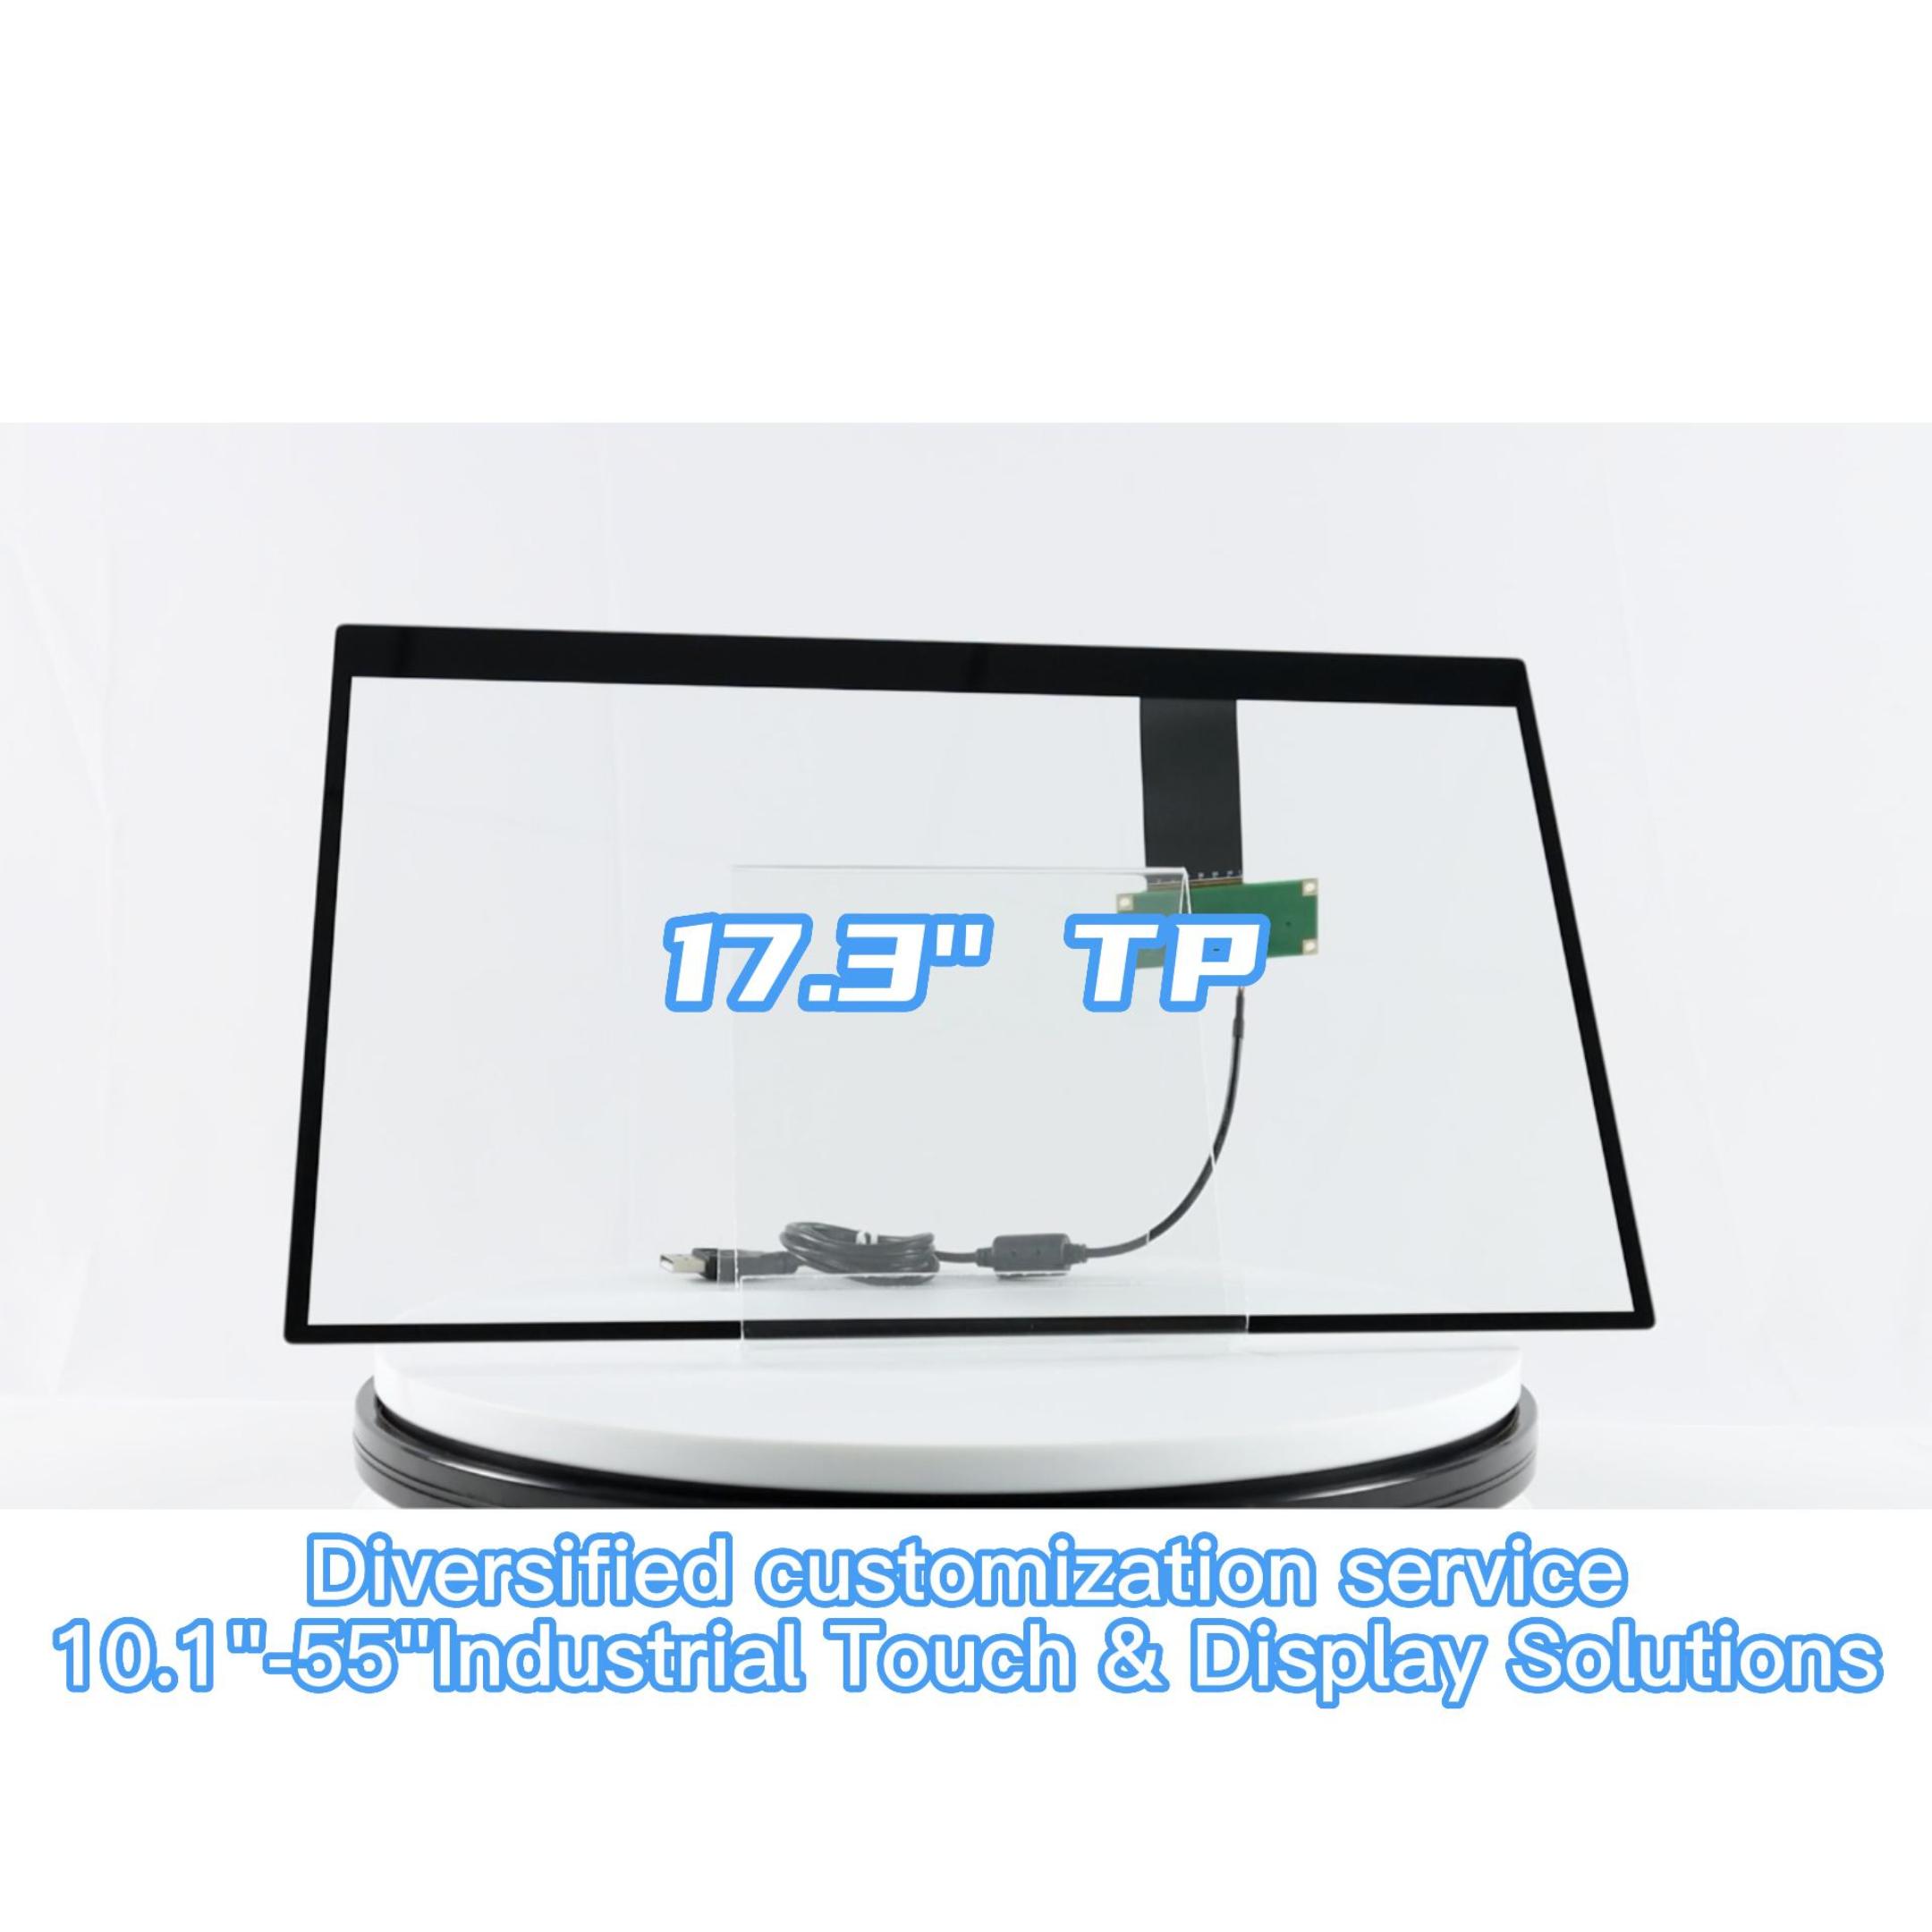 17.3 Inch With Usb Ip65 Waterproof Touch Screen Manufacturers